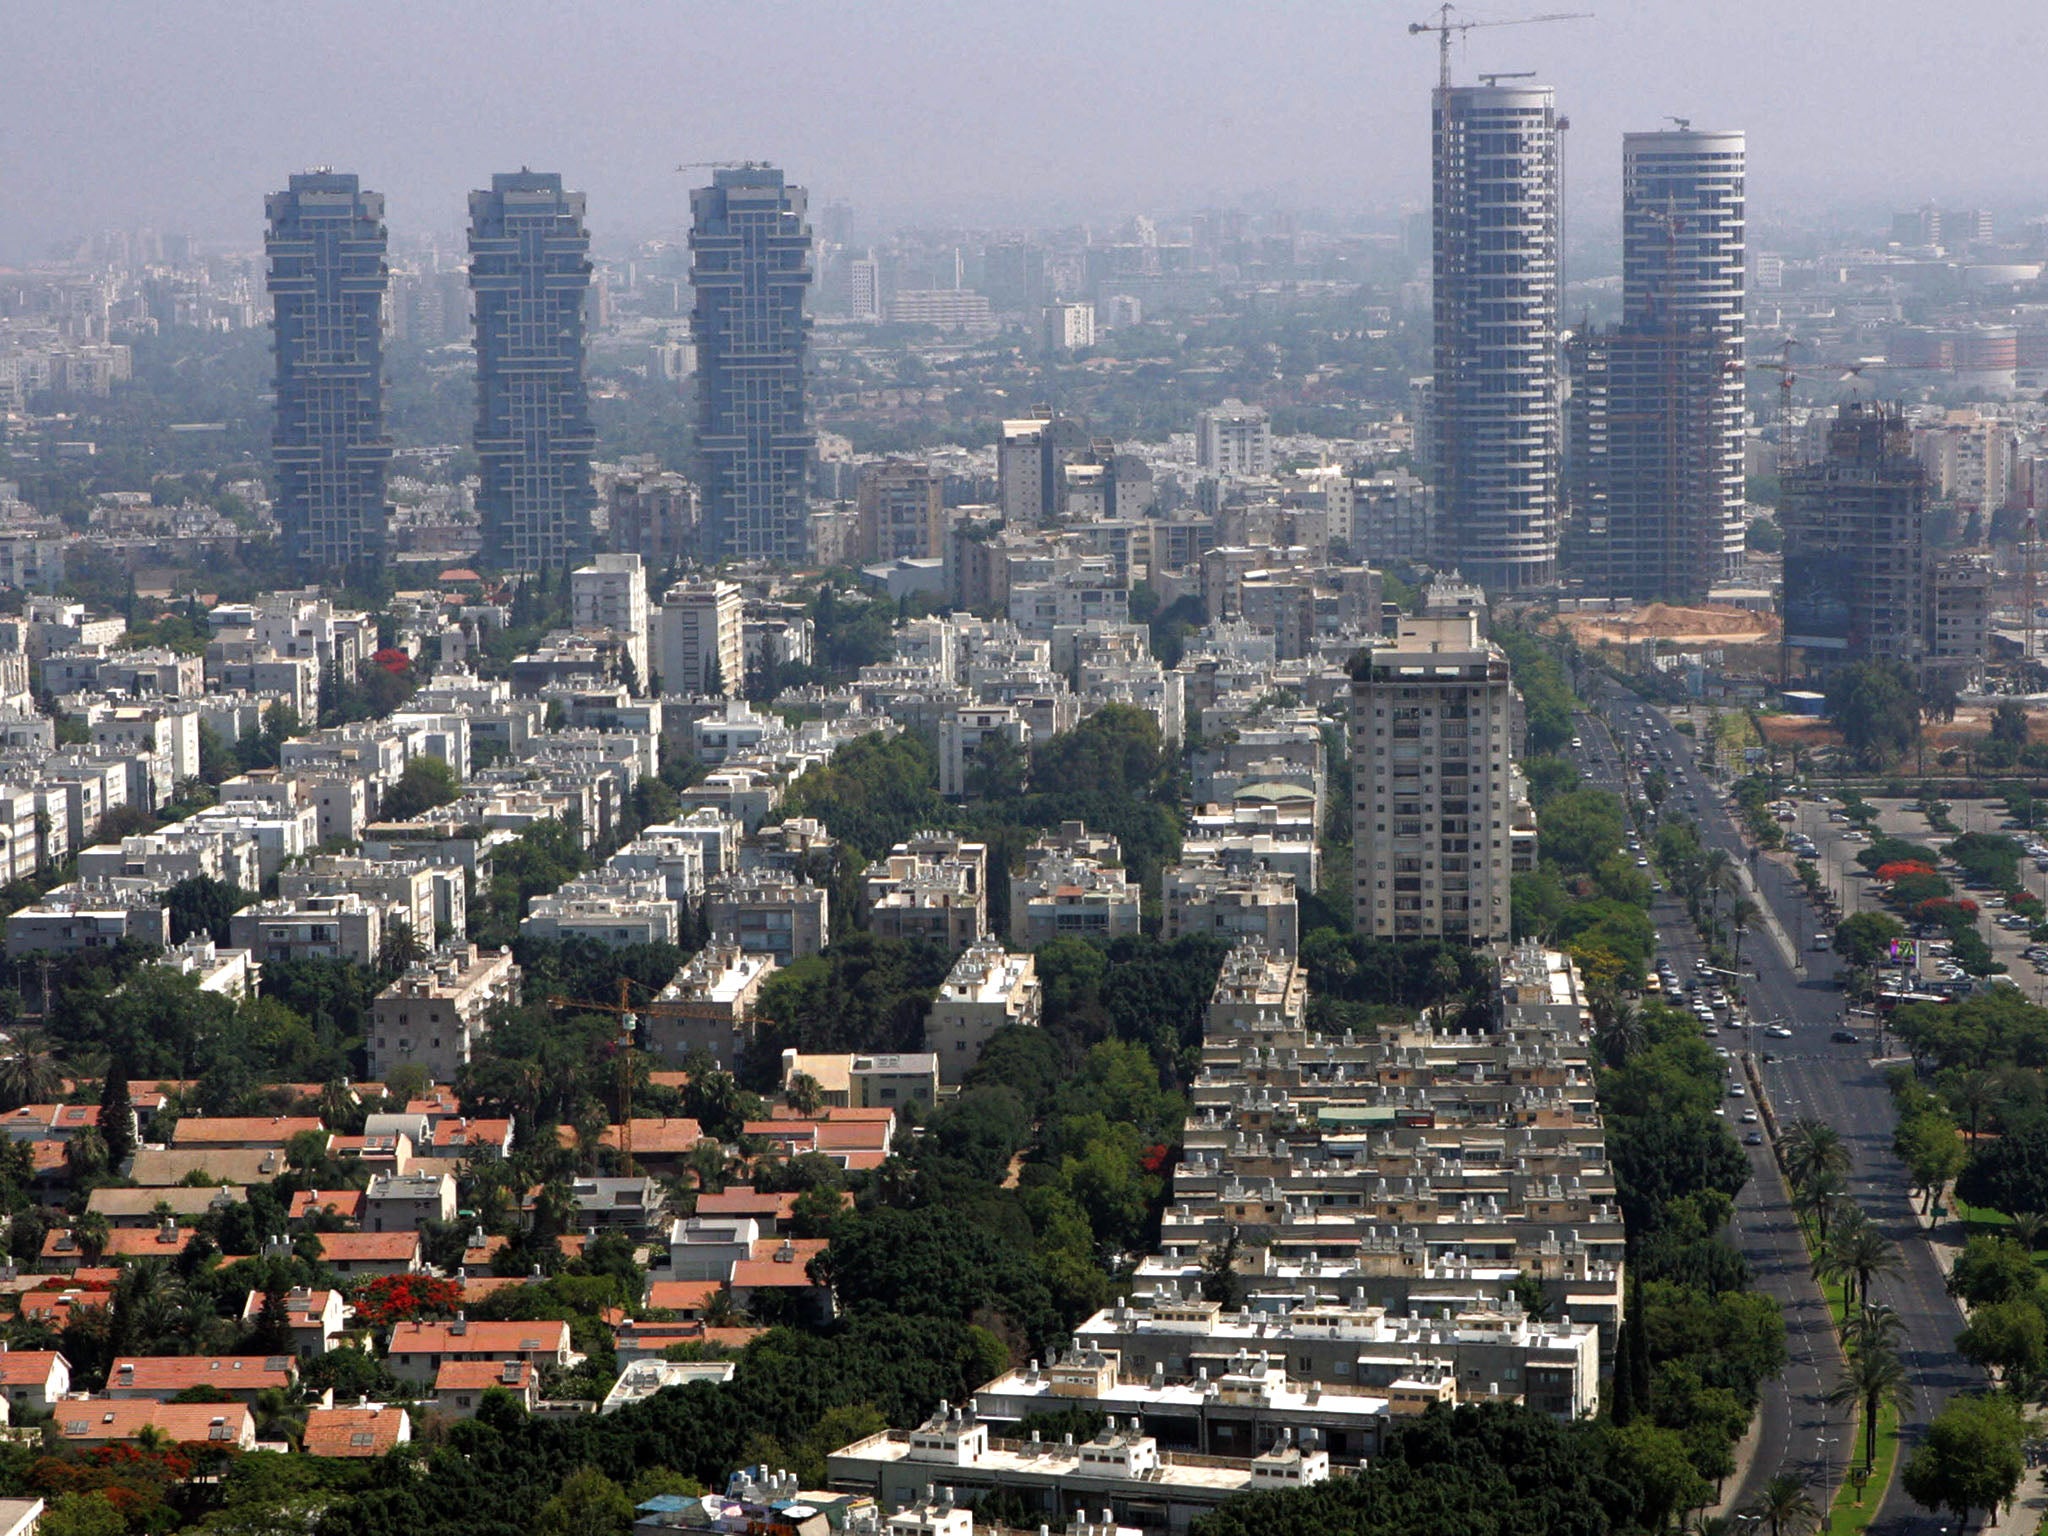 Tel Aviv: Soon to be home to the mysterious 'Site 911'